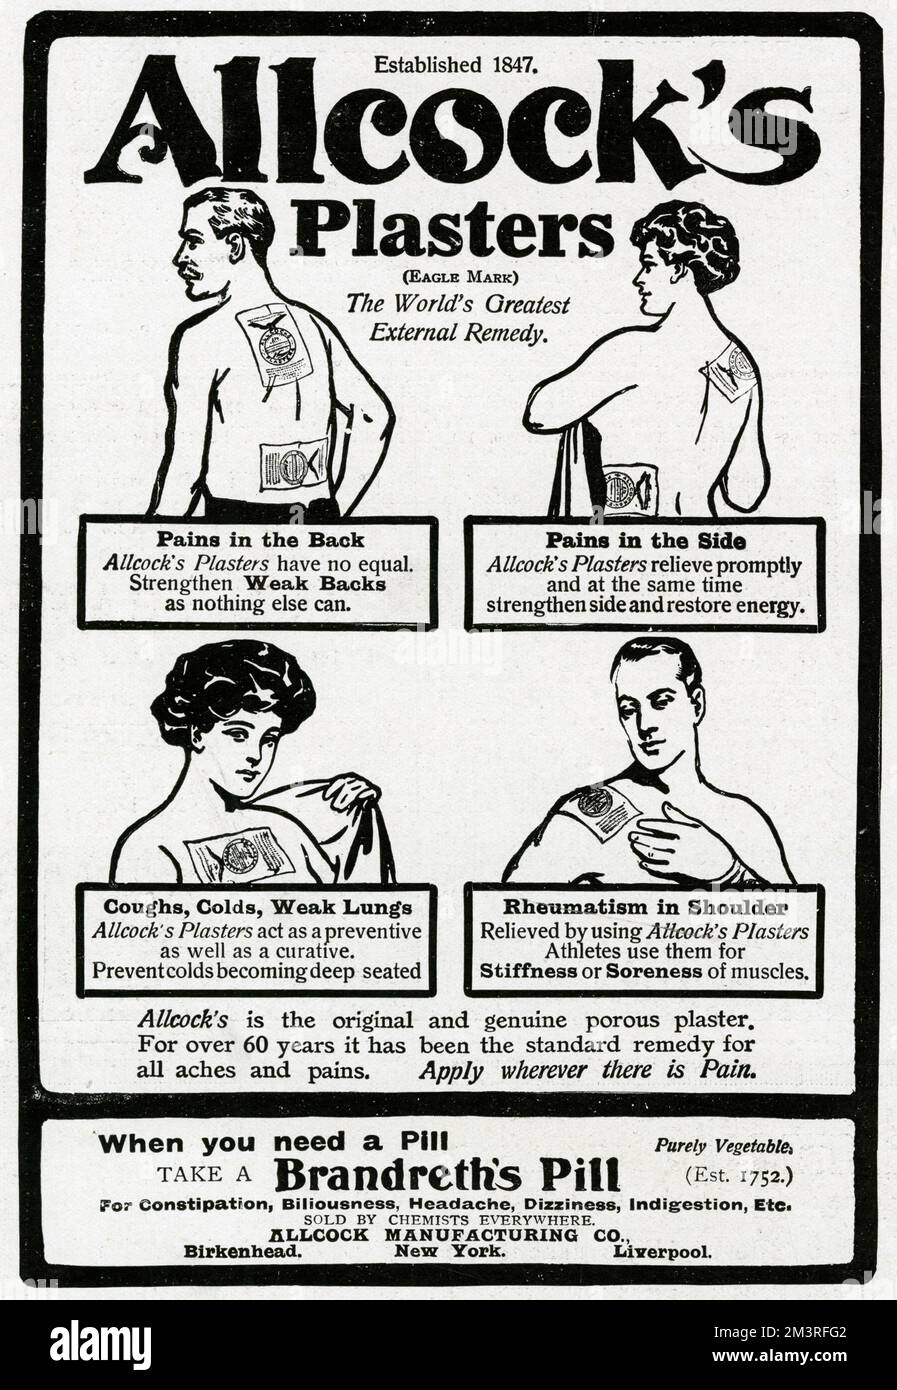 Allcock's Porous Plasters for pain relief, rheumatism in shoulders, stiffness or soreness of muscles, prevent coughs, colds, weak lungs and strengthen weak backs and sides and restore energy.  1915 Stock Photo